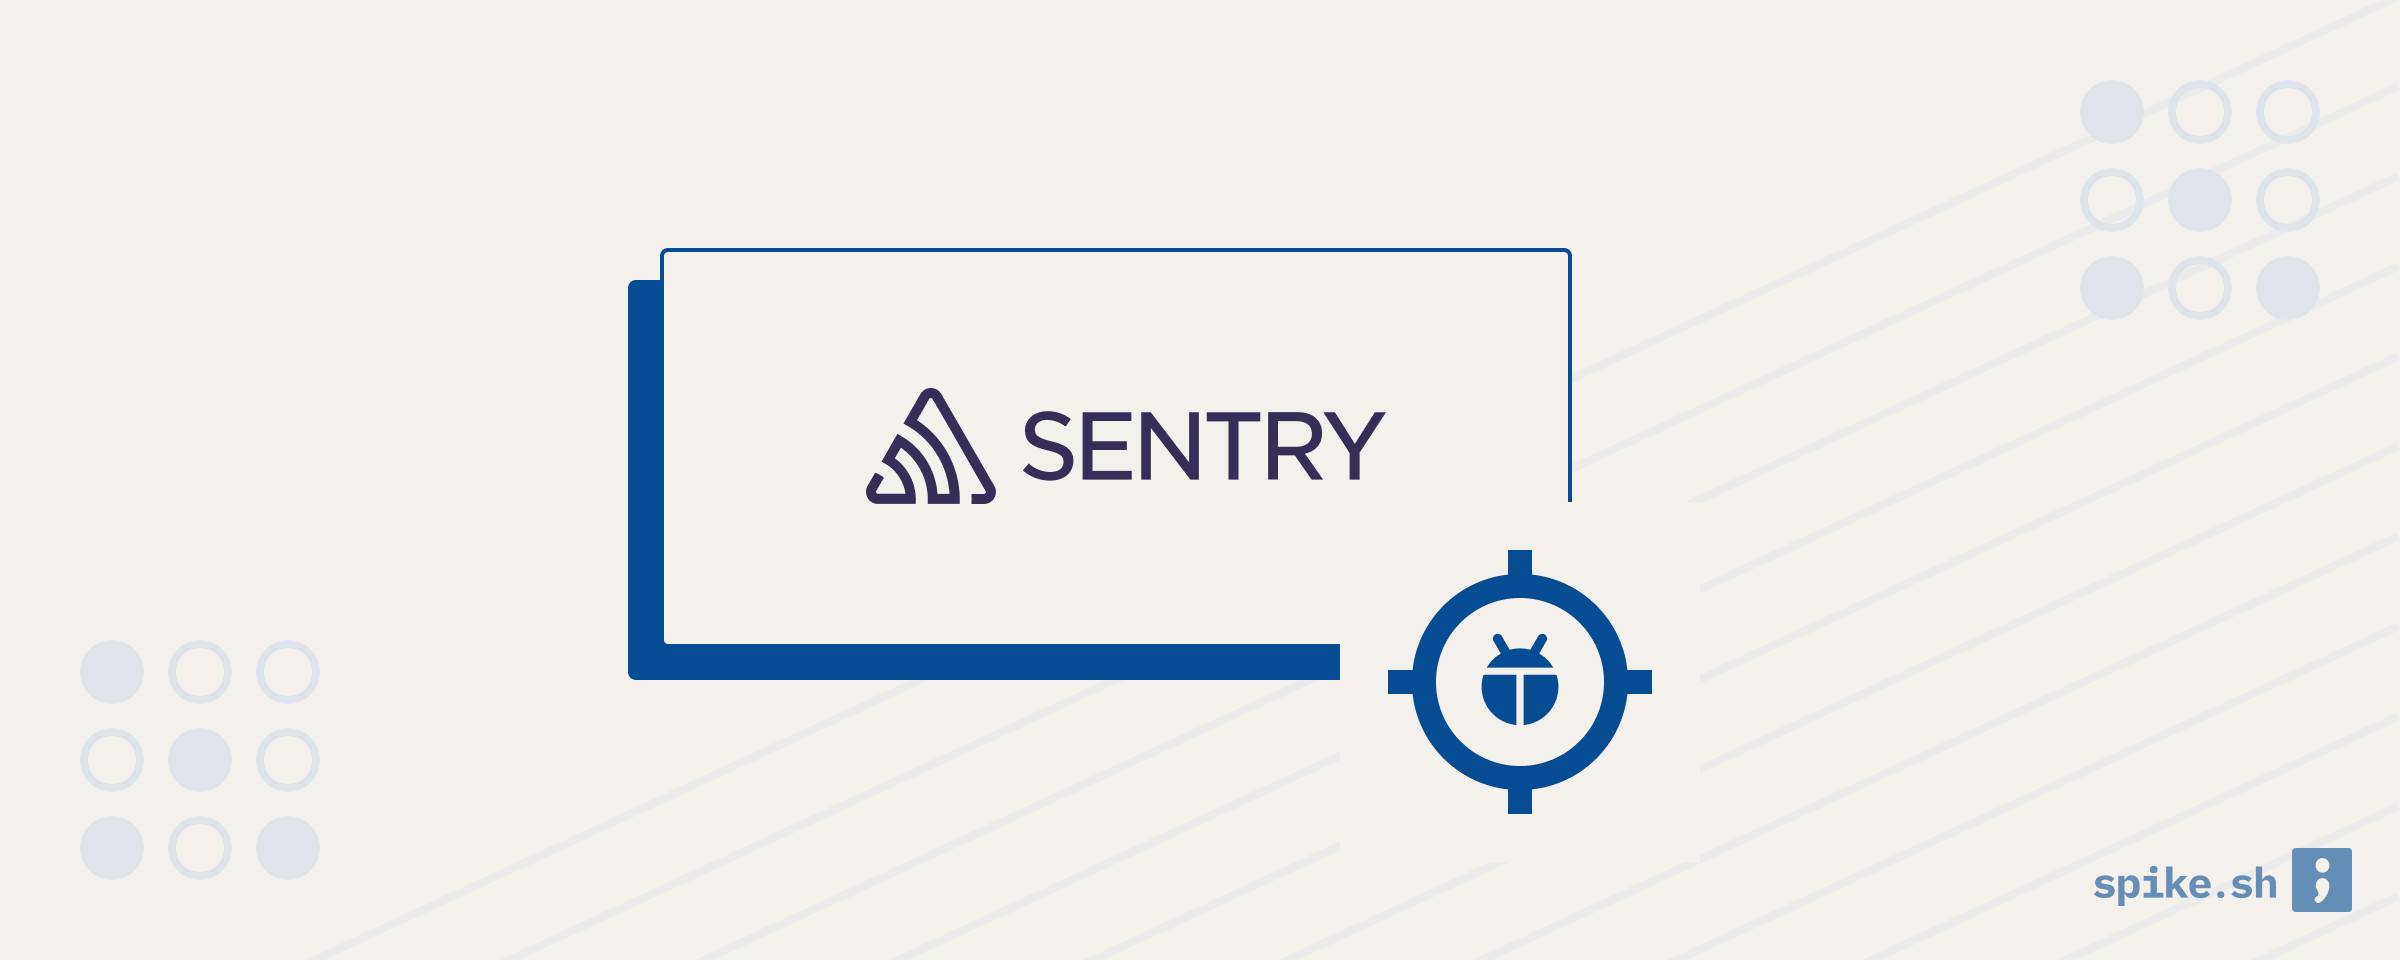 How to set up error tracking and alerts with Sentry